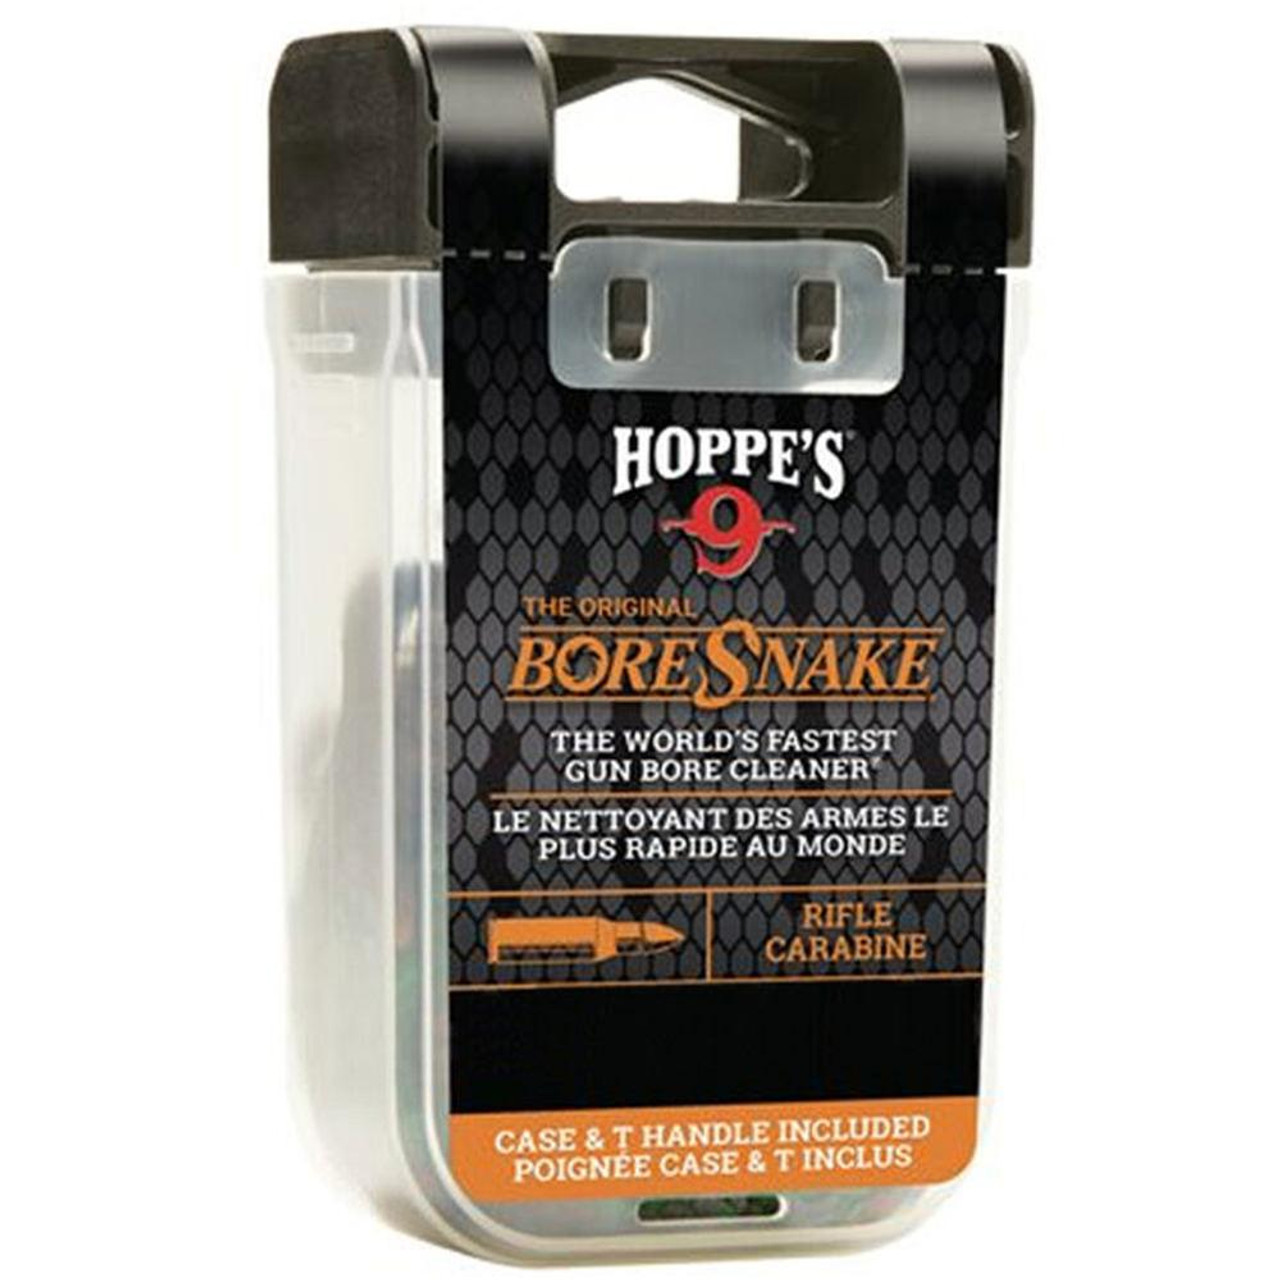 Hoppe's BoreSnake - cleaning cord with patented one-piece design for quick cleaning of firearm barrels. Thin guide cord with brass weight (with stamped caliber) for easy passage through the barrel. An integrated bronze brush cleans carbon deposits, while the extended end of the cord serves to remove loose dirt. Compact case. The case lid serves as a convenient handle for pulling the cord.